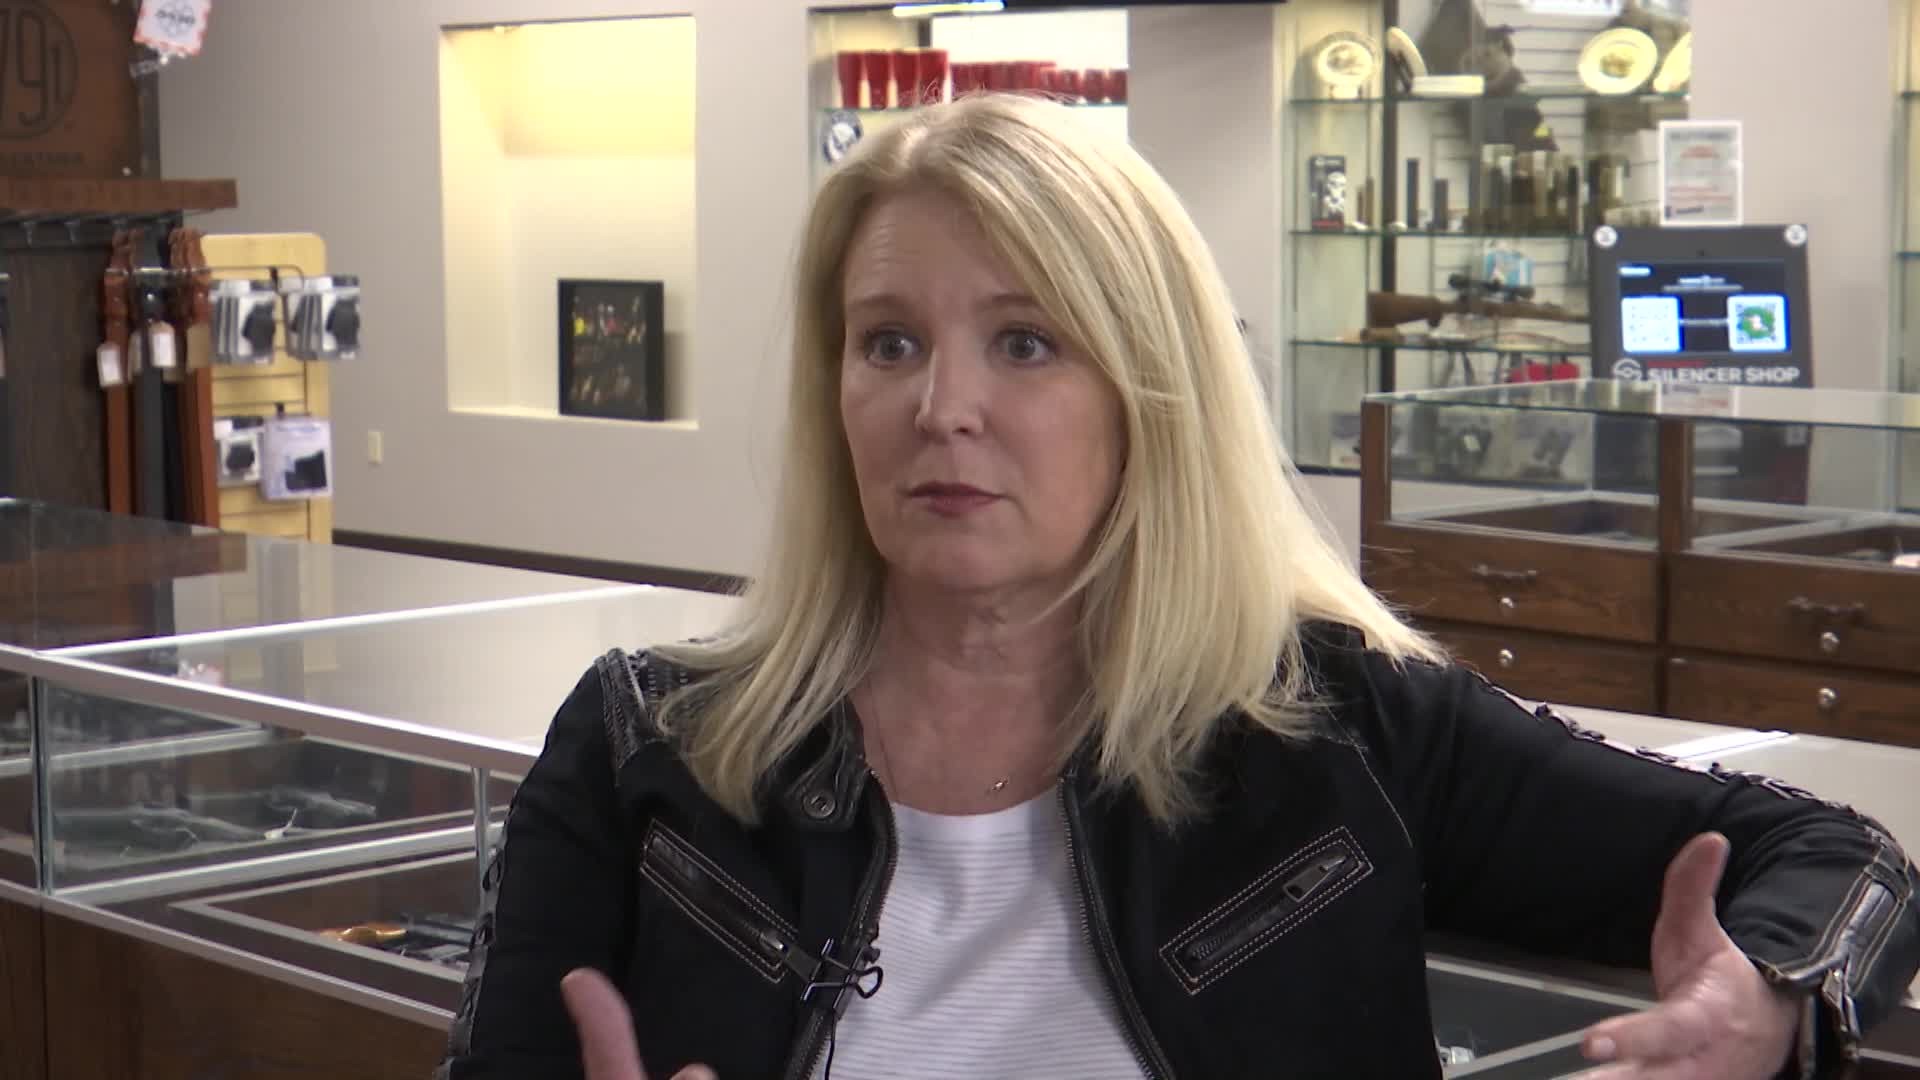 Bullet & Barrel Co-owner, Melanie Hammer Murray, talks about what the updated firearm policy in Alabama means for her store.